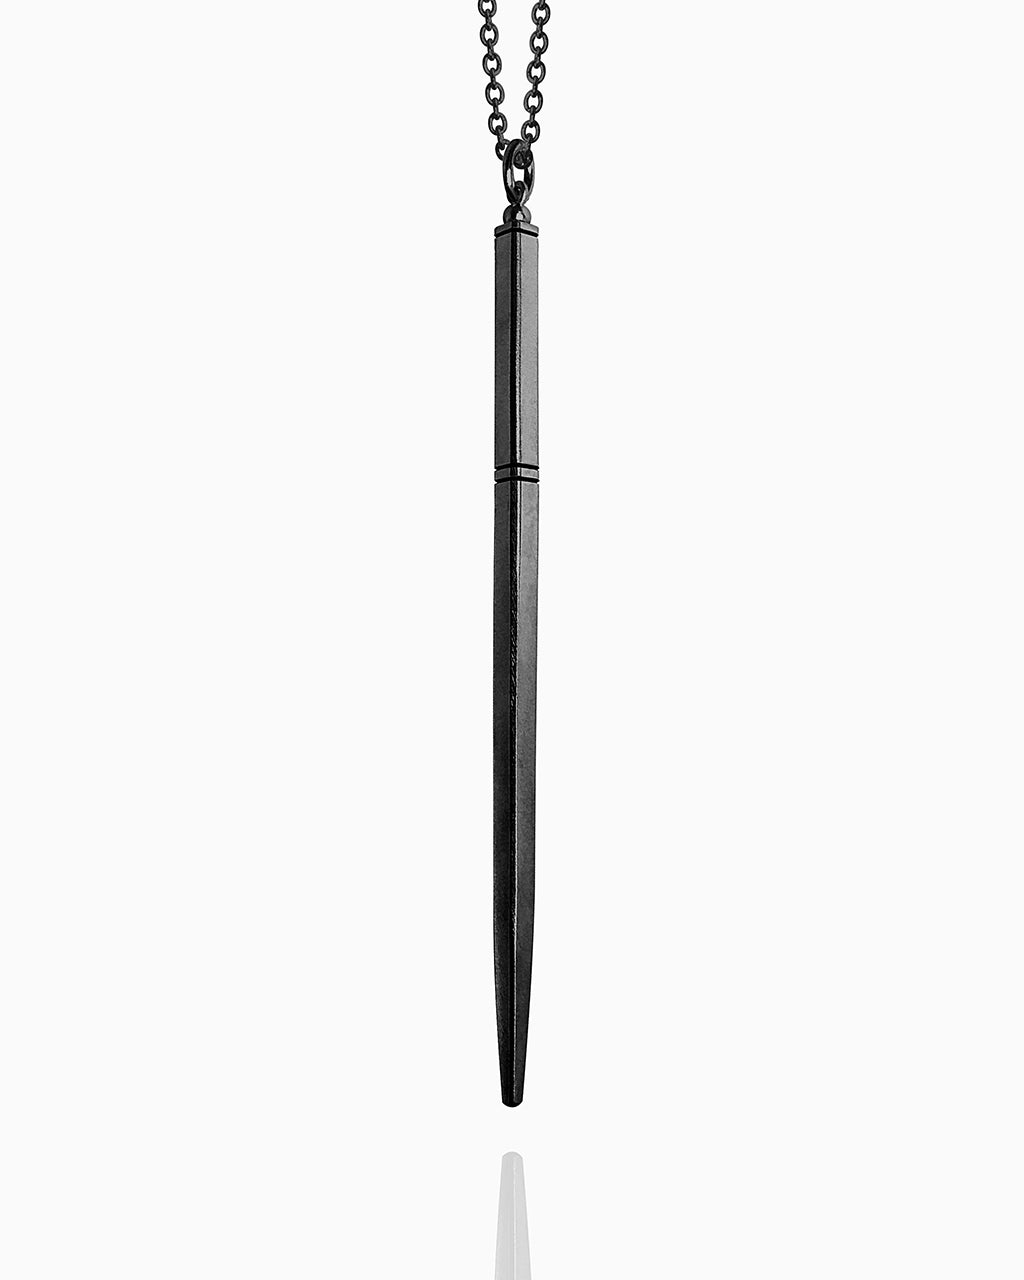 A blackened wand necklace made of sterling silver hanging against a white background. This wand has a tapered square shape and is completely smooth except for three carved horizontal lines to define the wand handle.